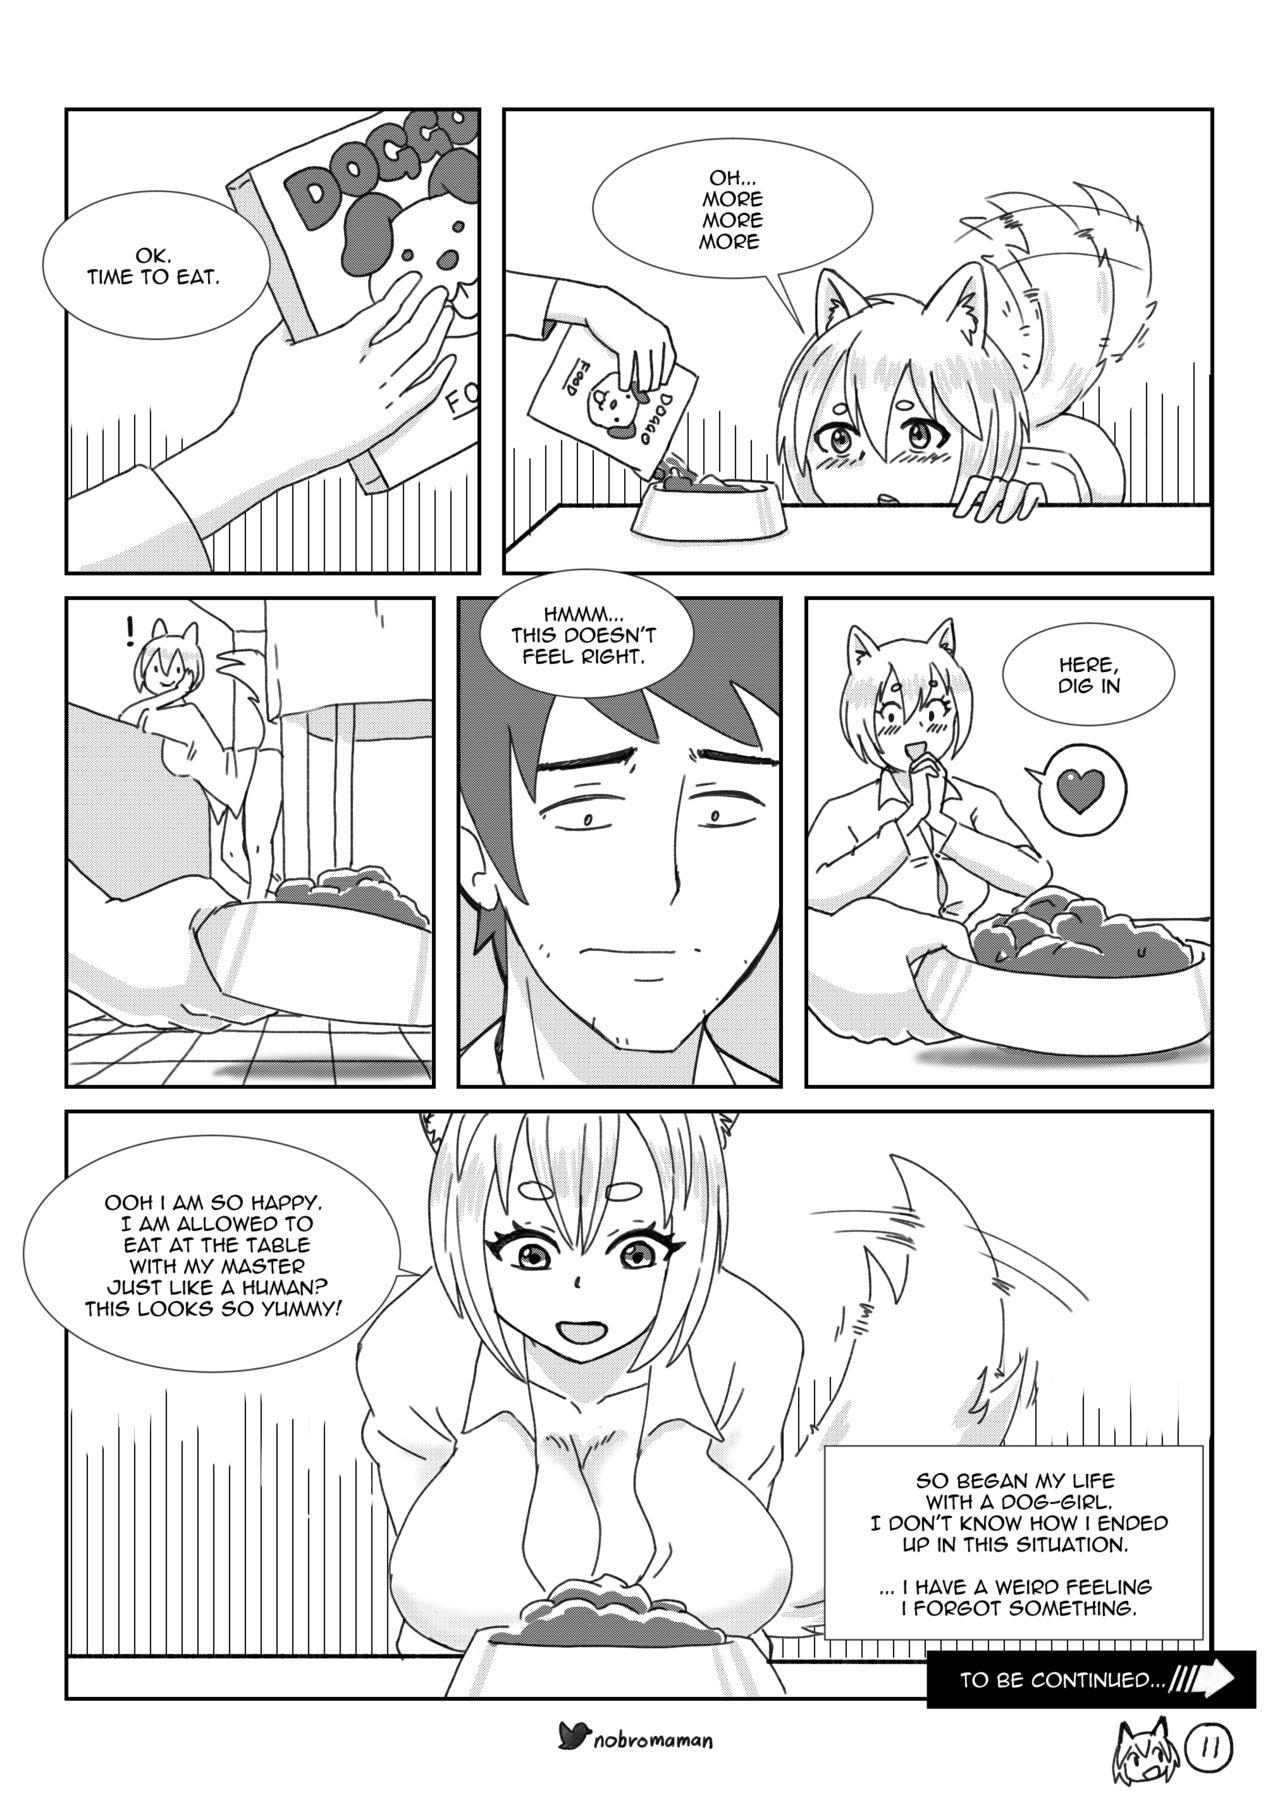 Real Orgasms Life with a dog girl - Chapter1 Sexy Sluts - Page 12